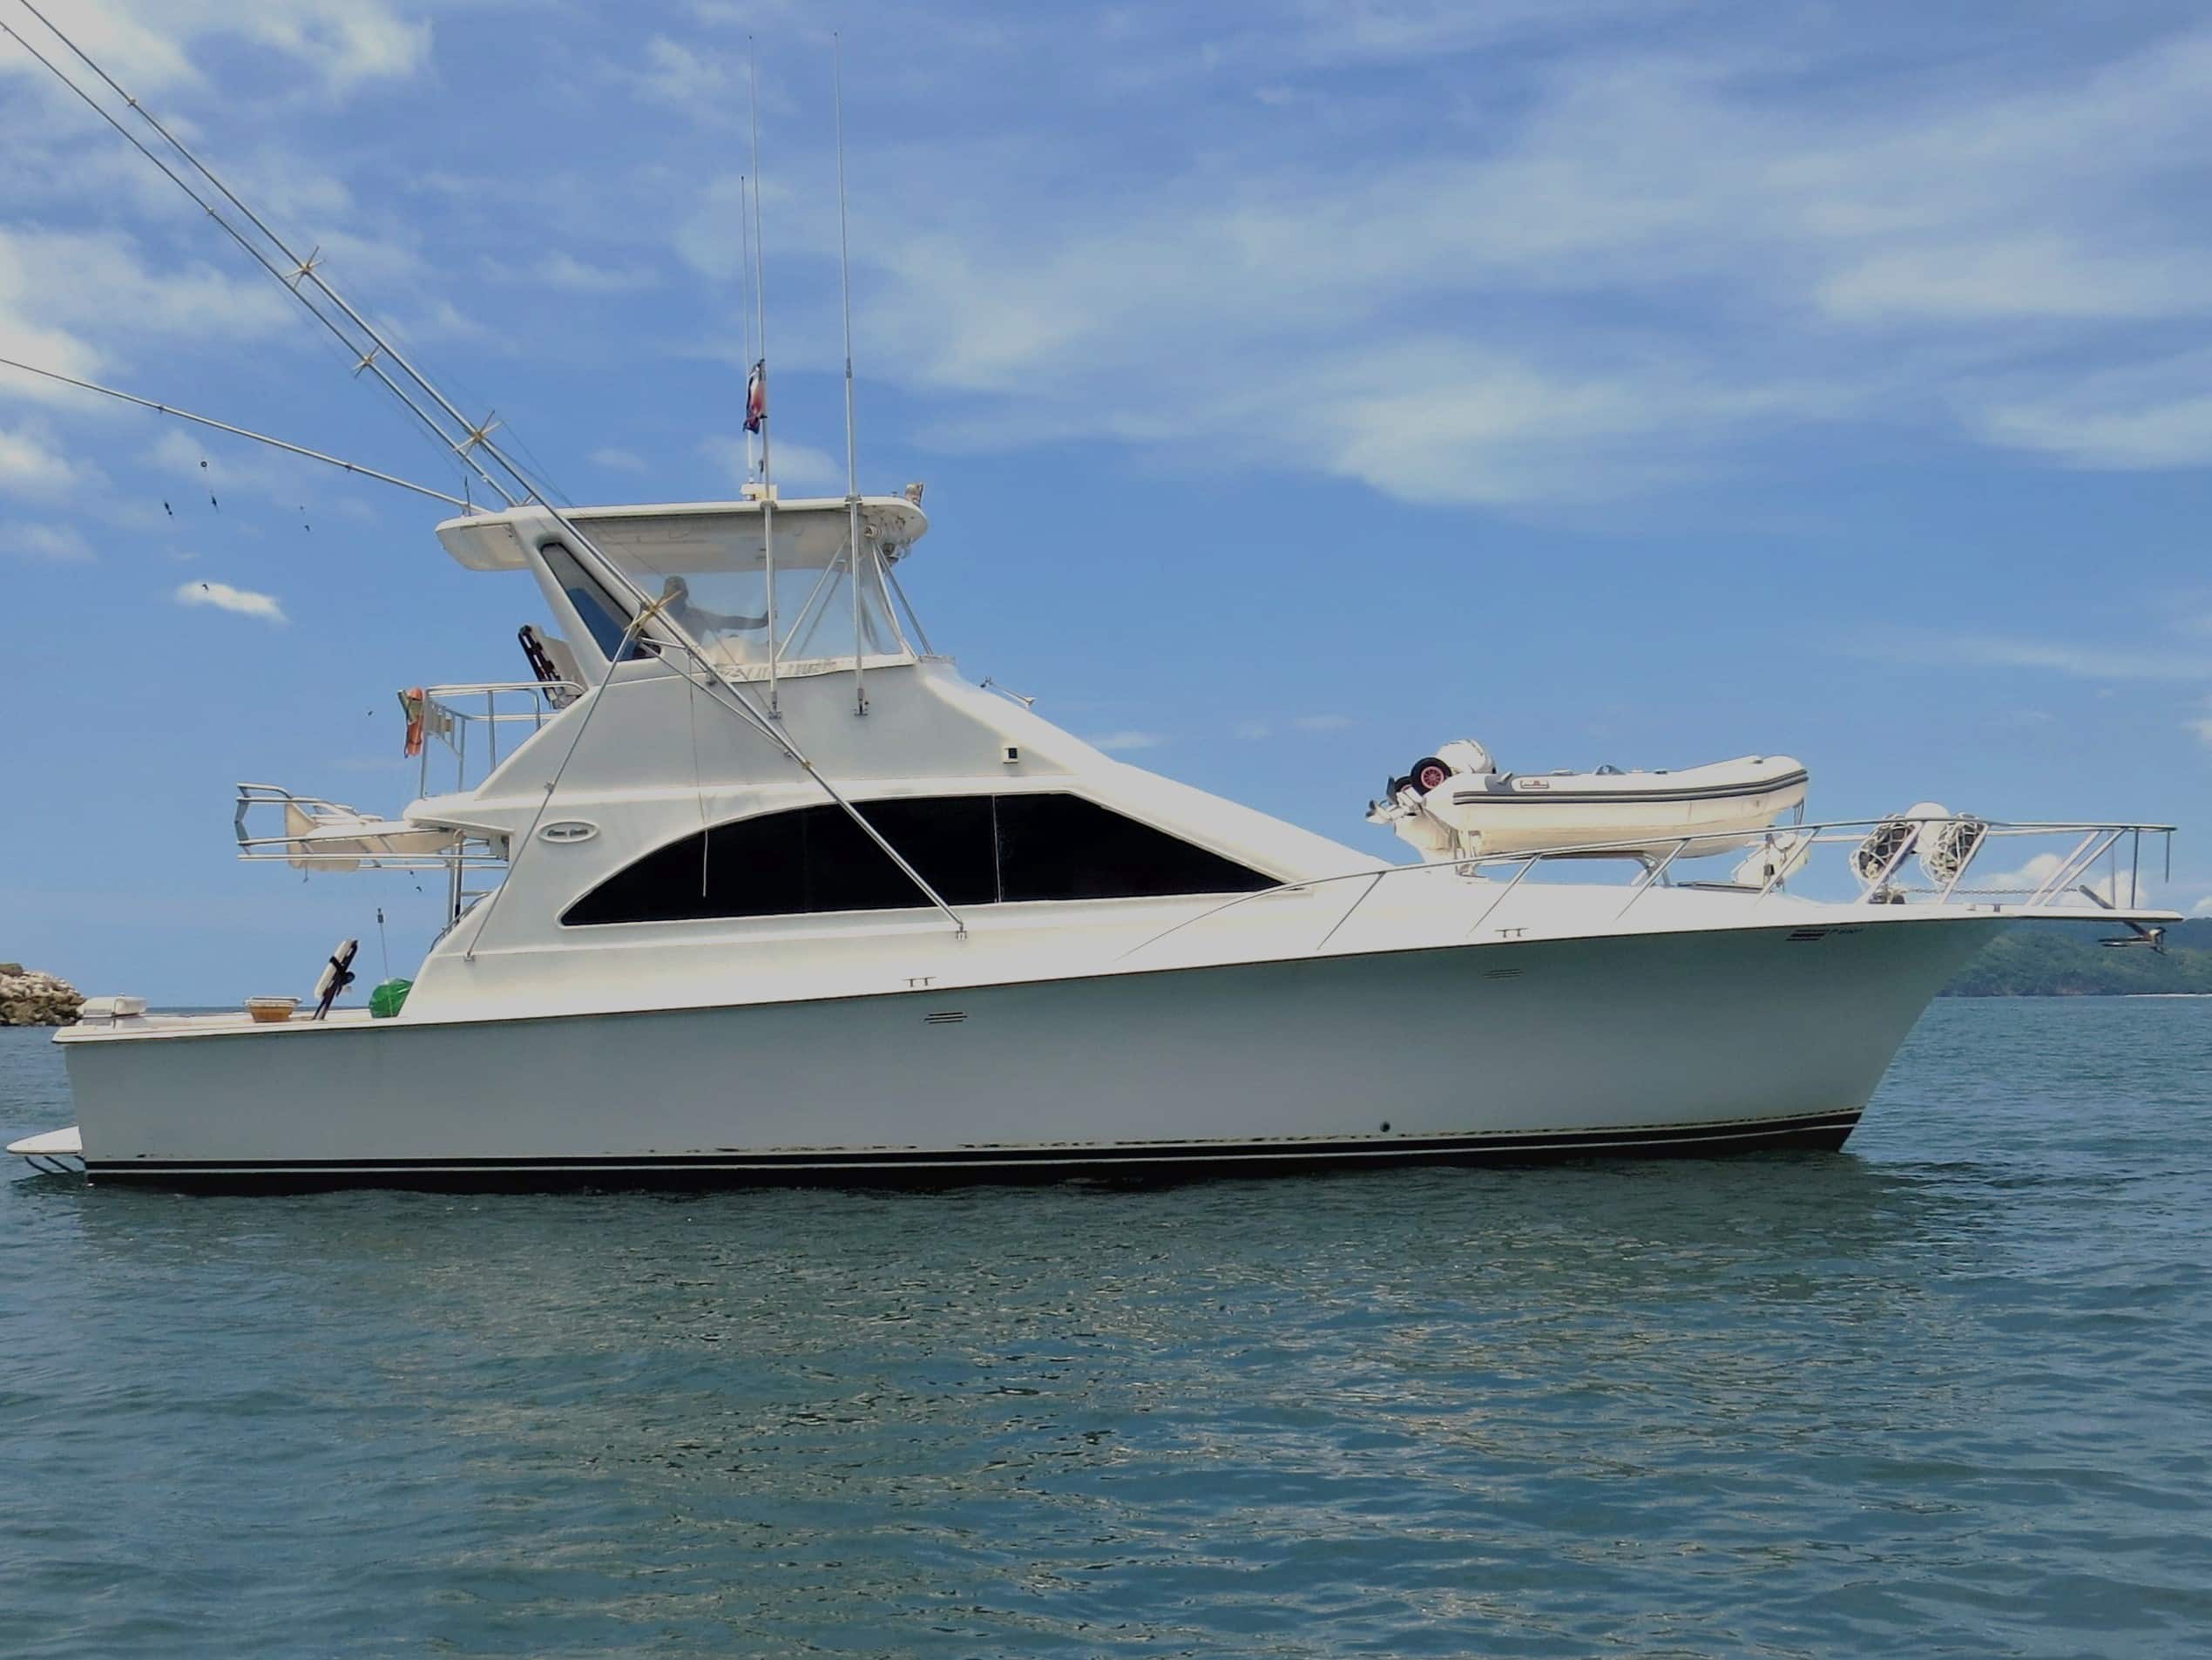 48 ft. Ocean Yacht, 8 anglers max, El Coco by CR Fishing Charters